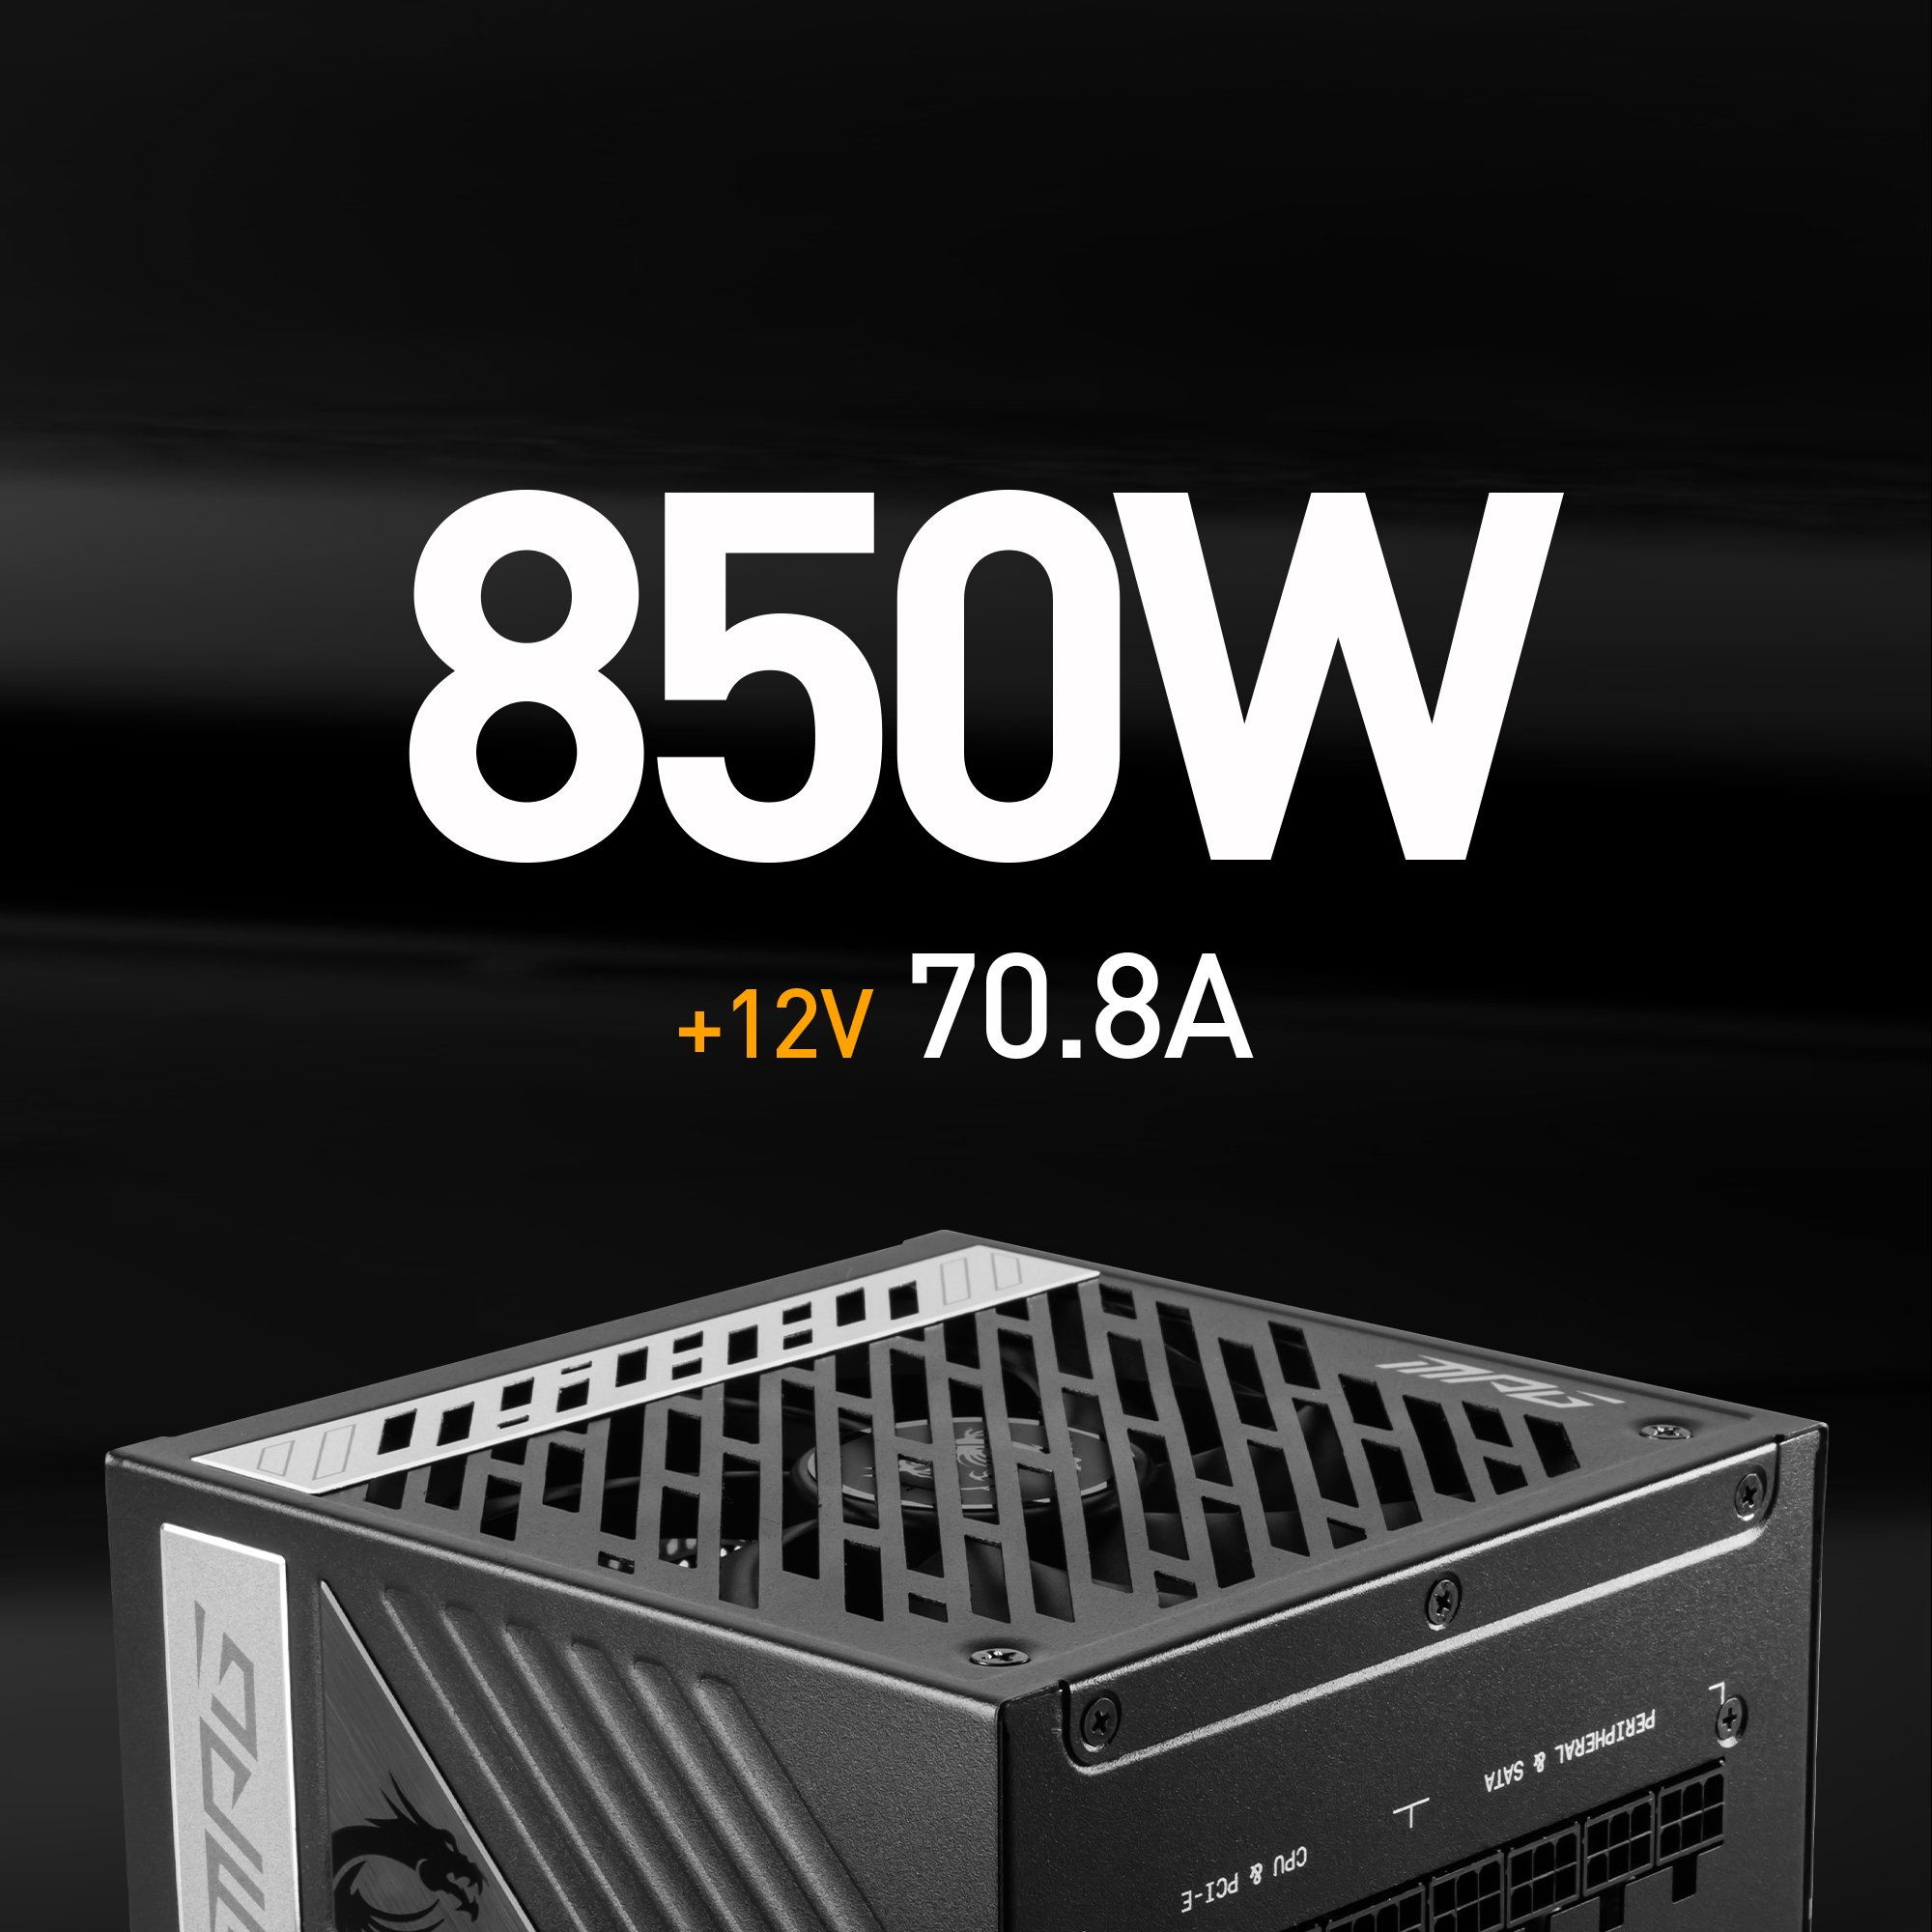 MSI - MPG A850G PCIE 5.0, 80 GOLD Full Modular Gaming PSU, 12VHPWR Cable,  4080 4070 ATX 3.0 Compatible, 850W Power Supply 